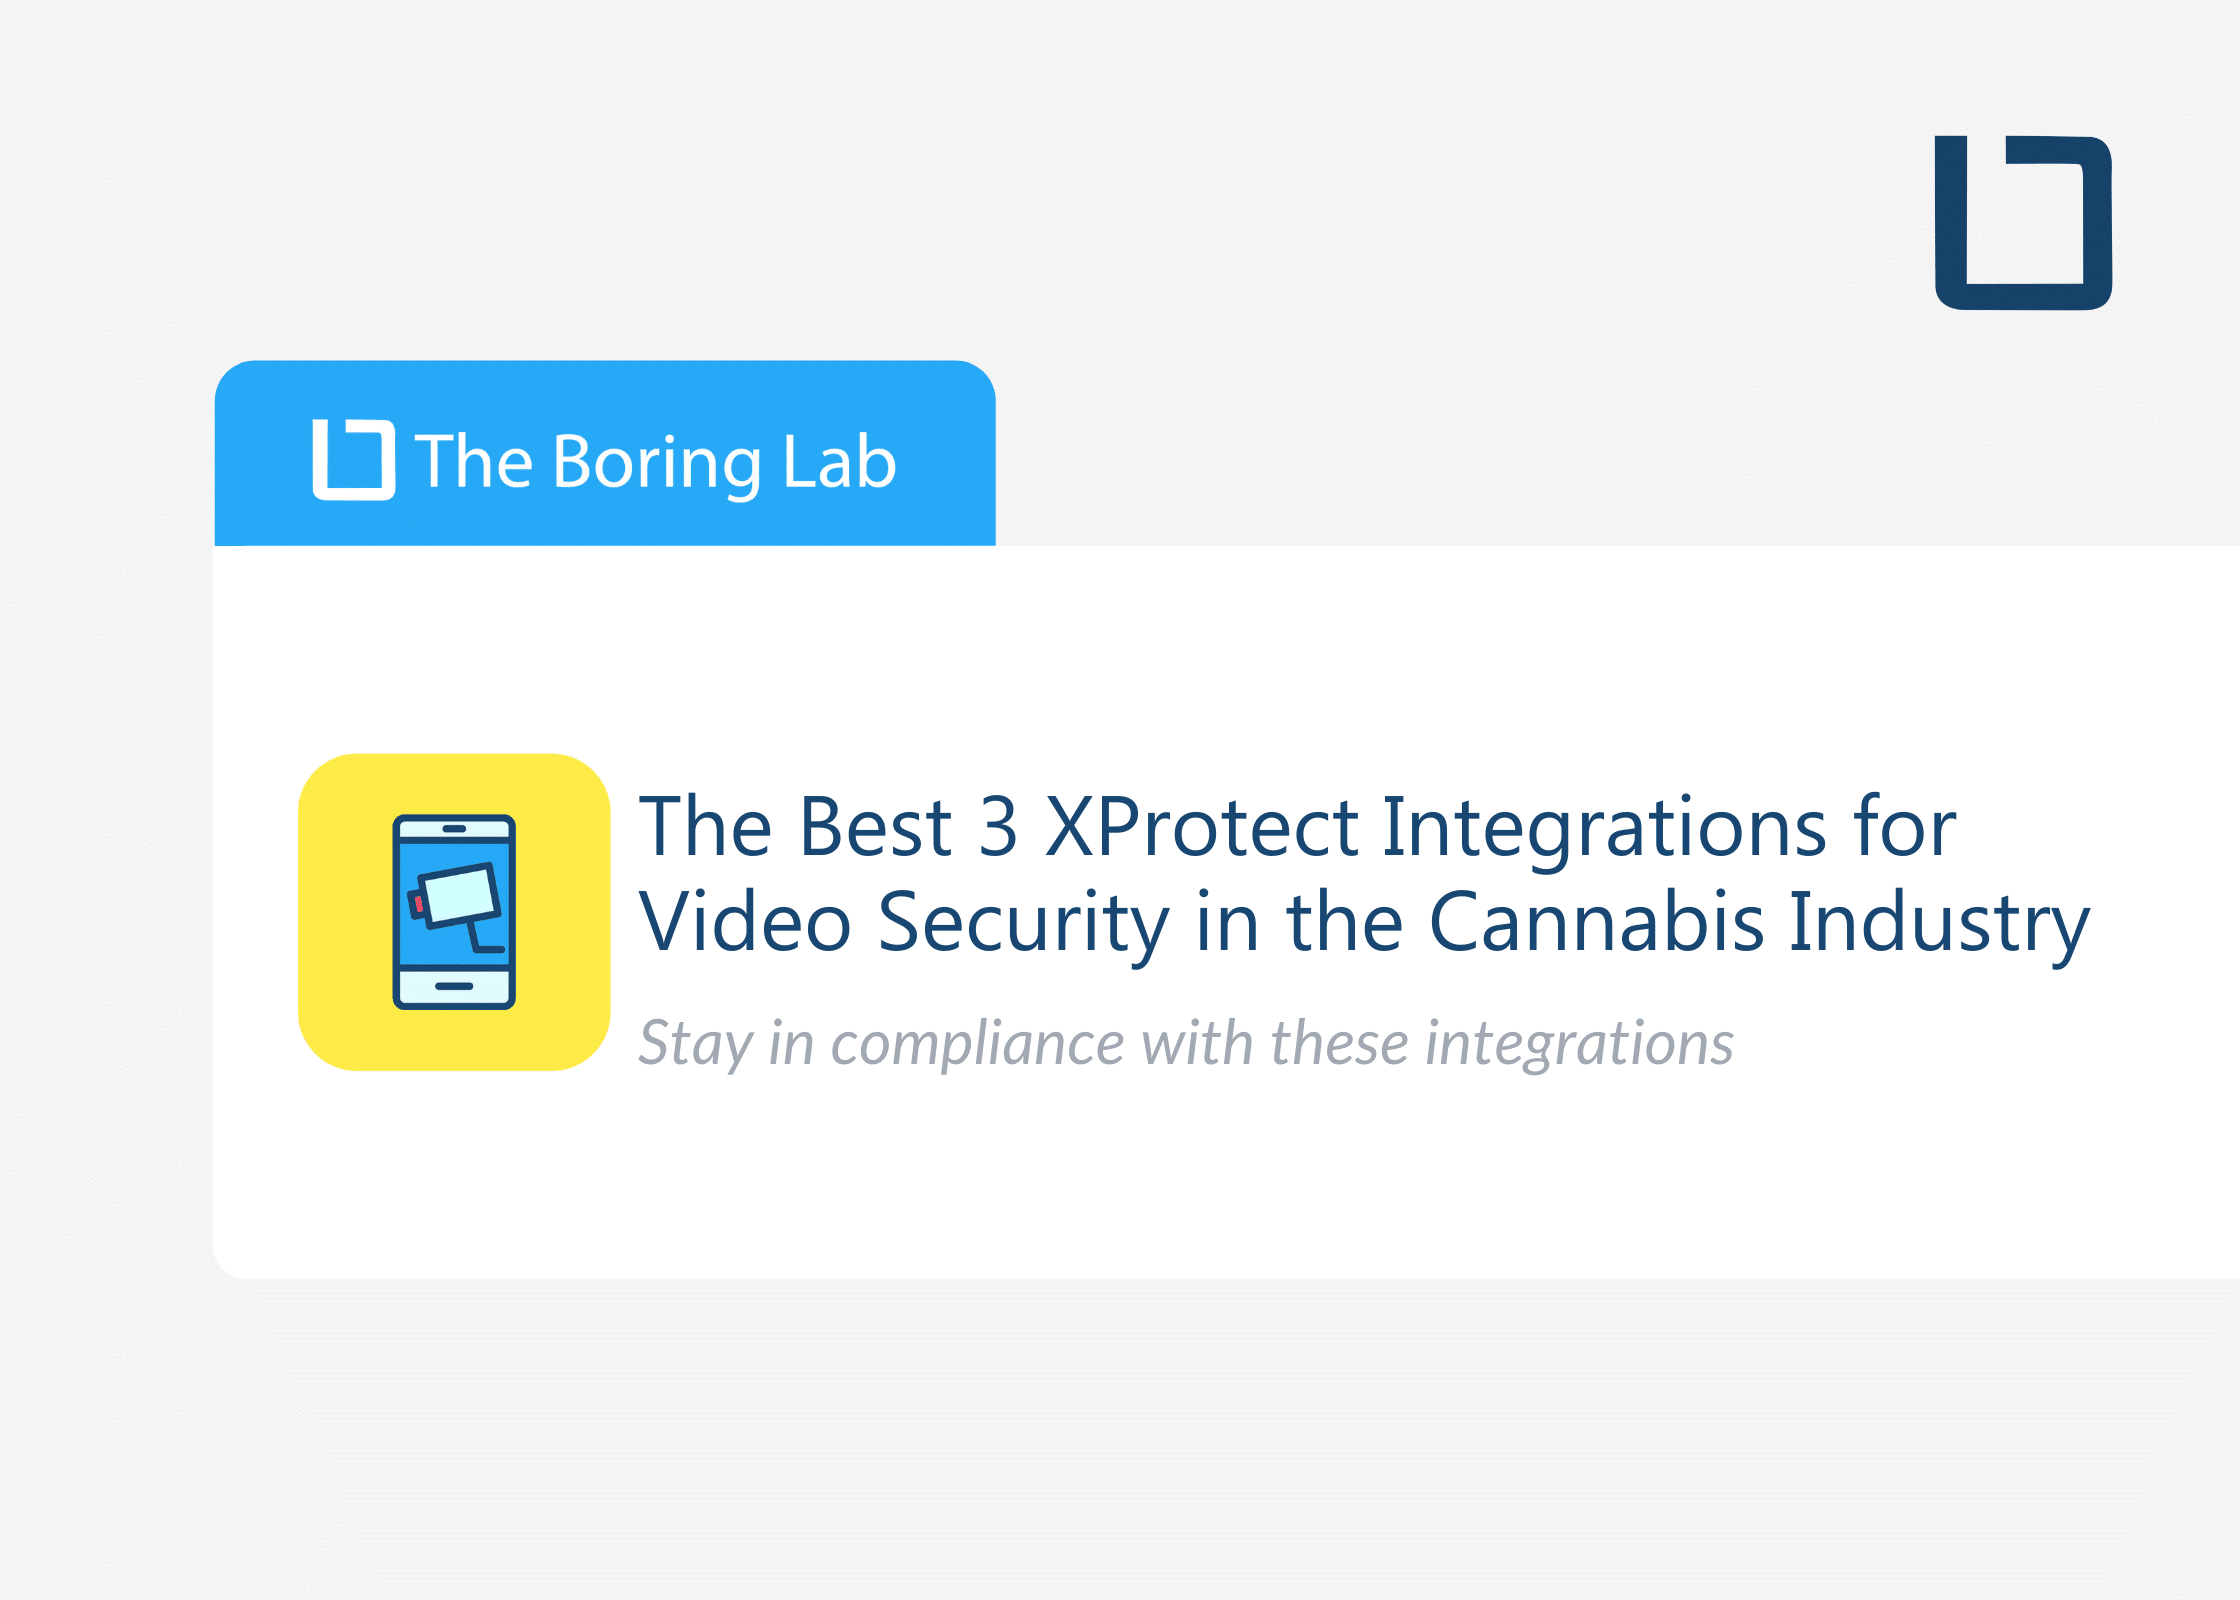 The Best 3 XProtect Integrations for Video Security in the Cannabis Industry